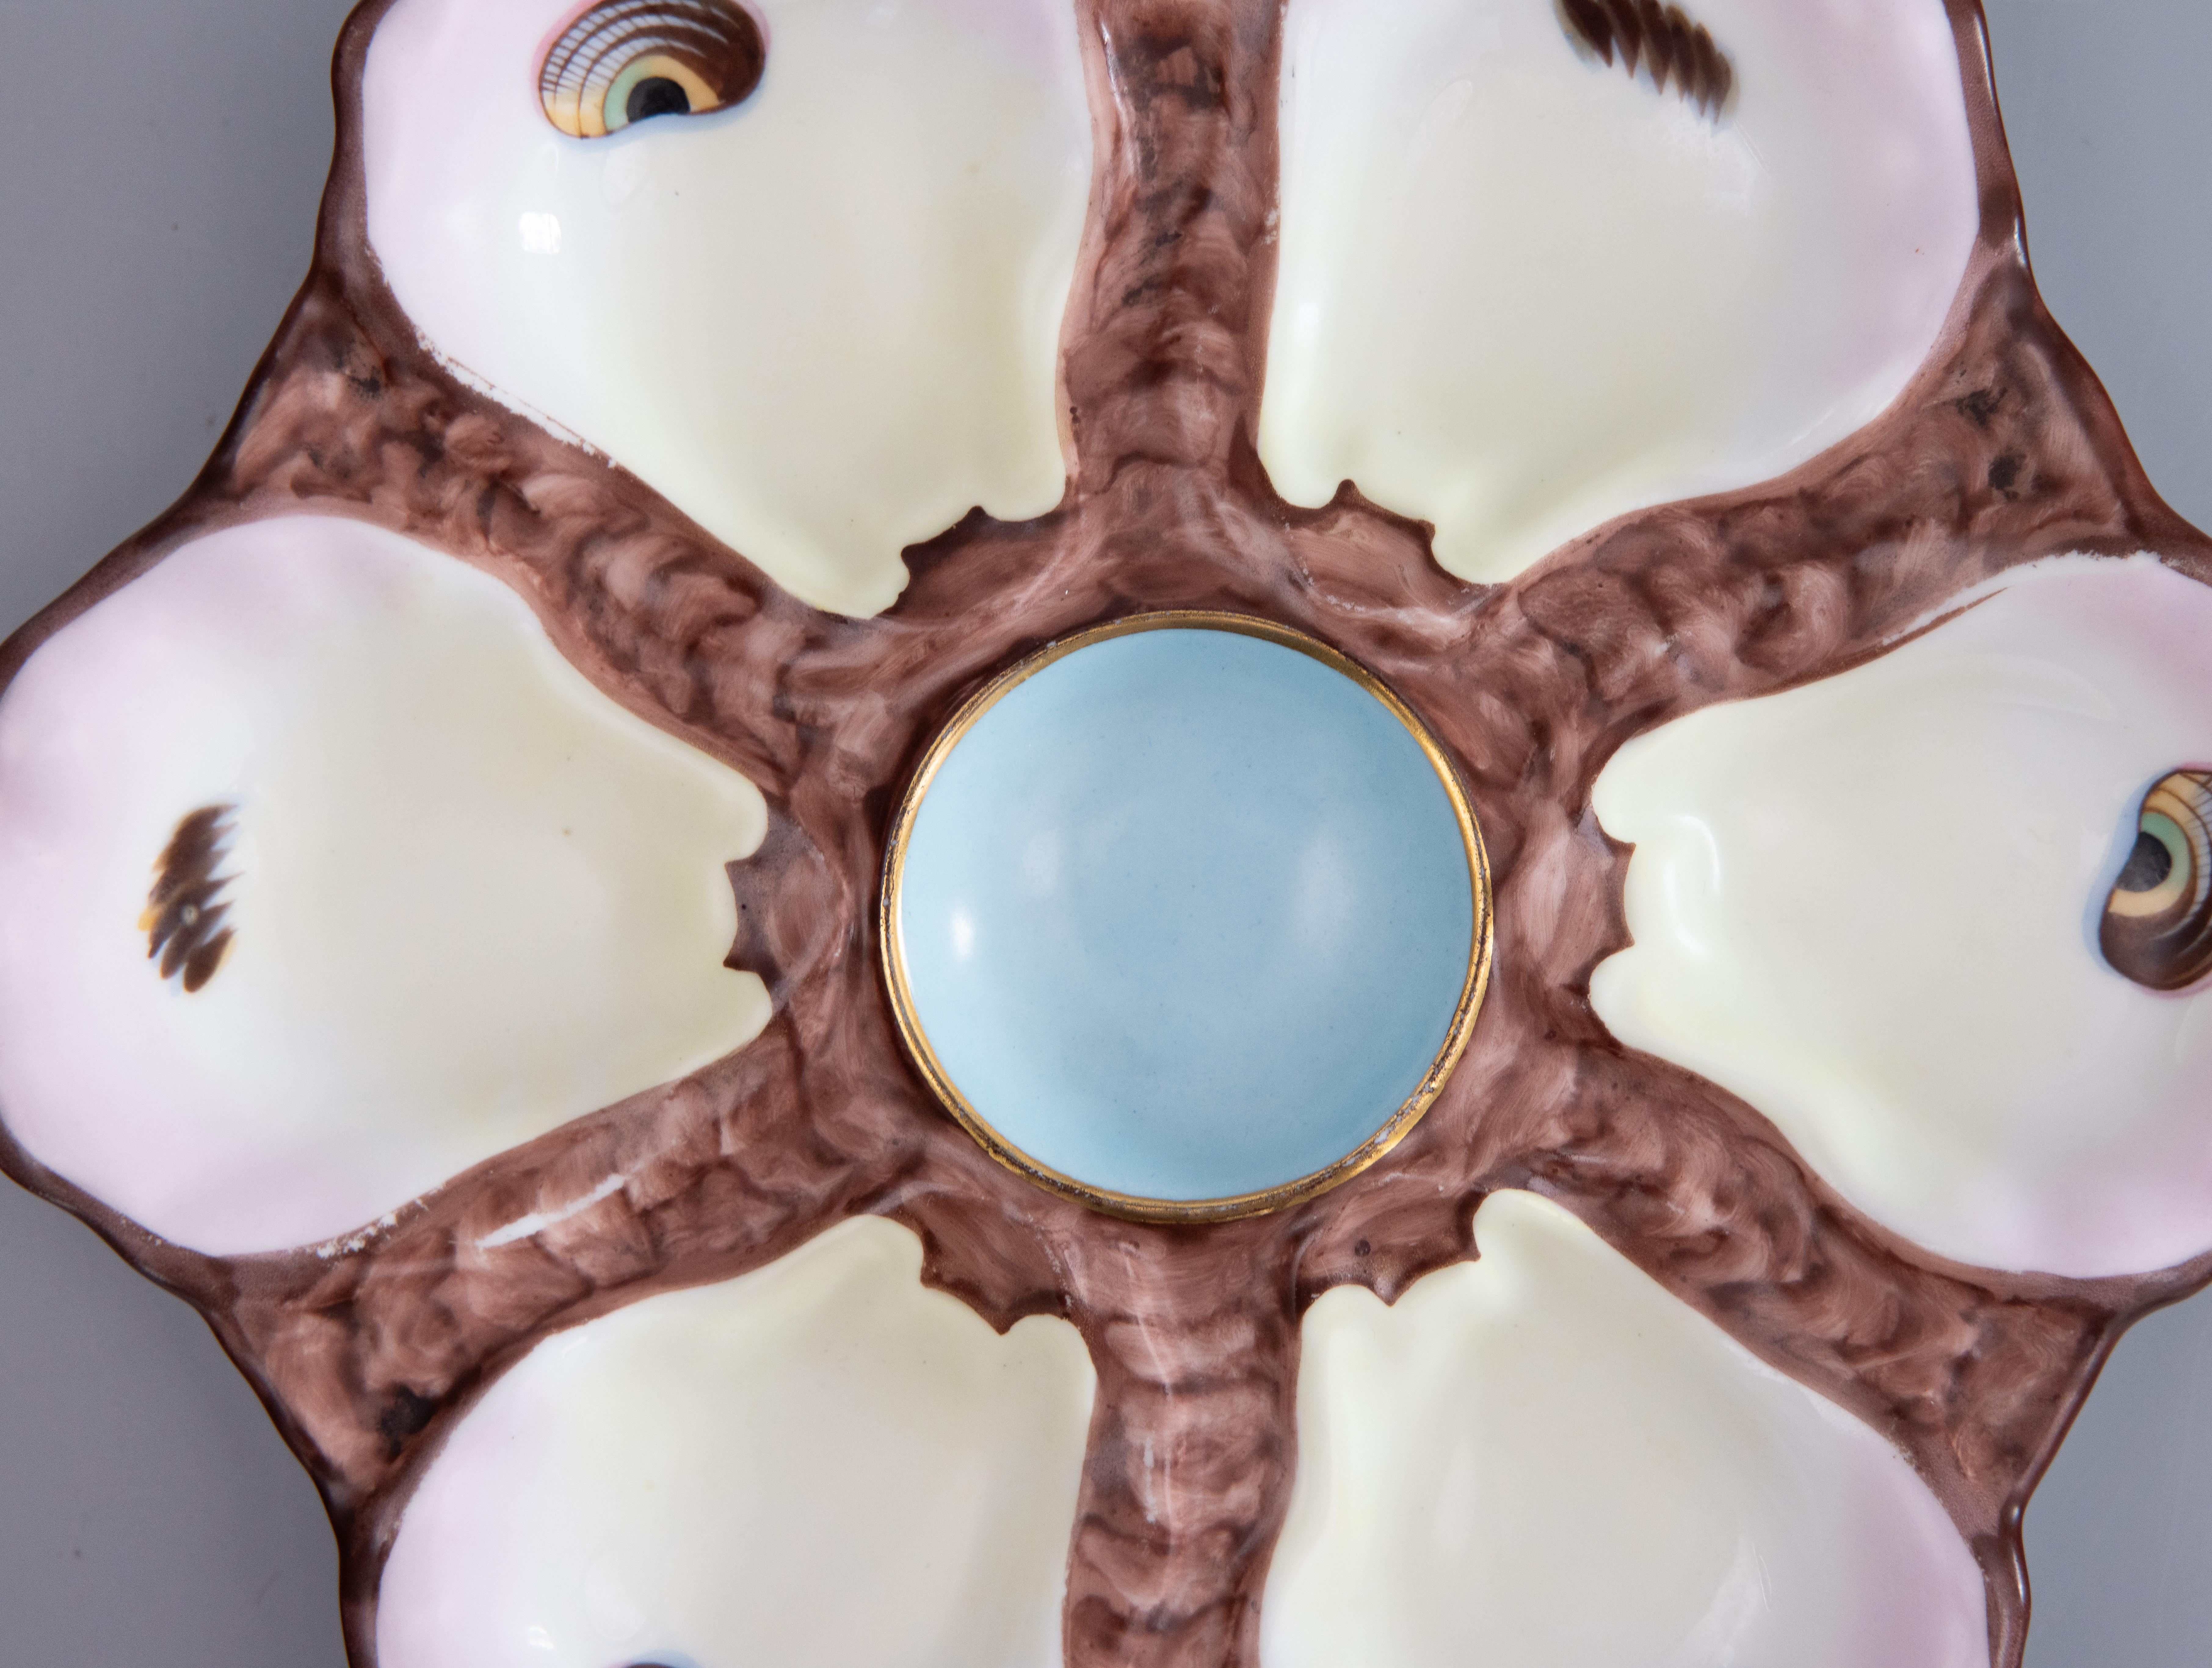 A gorgeous antique 19th-Century French majolica porcelain oyster plate. This fine quality oyster plate has six wells with hand painted 'eyes,' a soft blush pink tint on the edges, and a lovely robin egg blue center. It displays beautifully and would